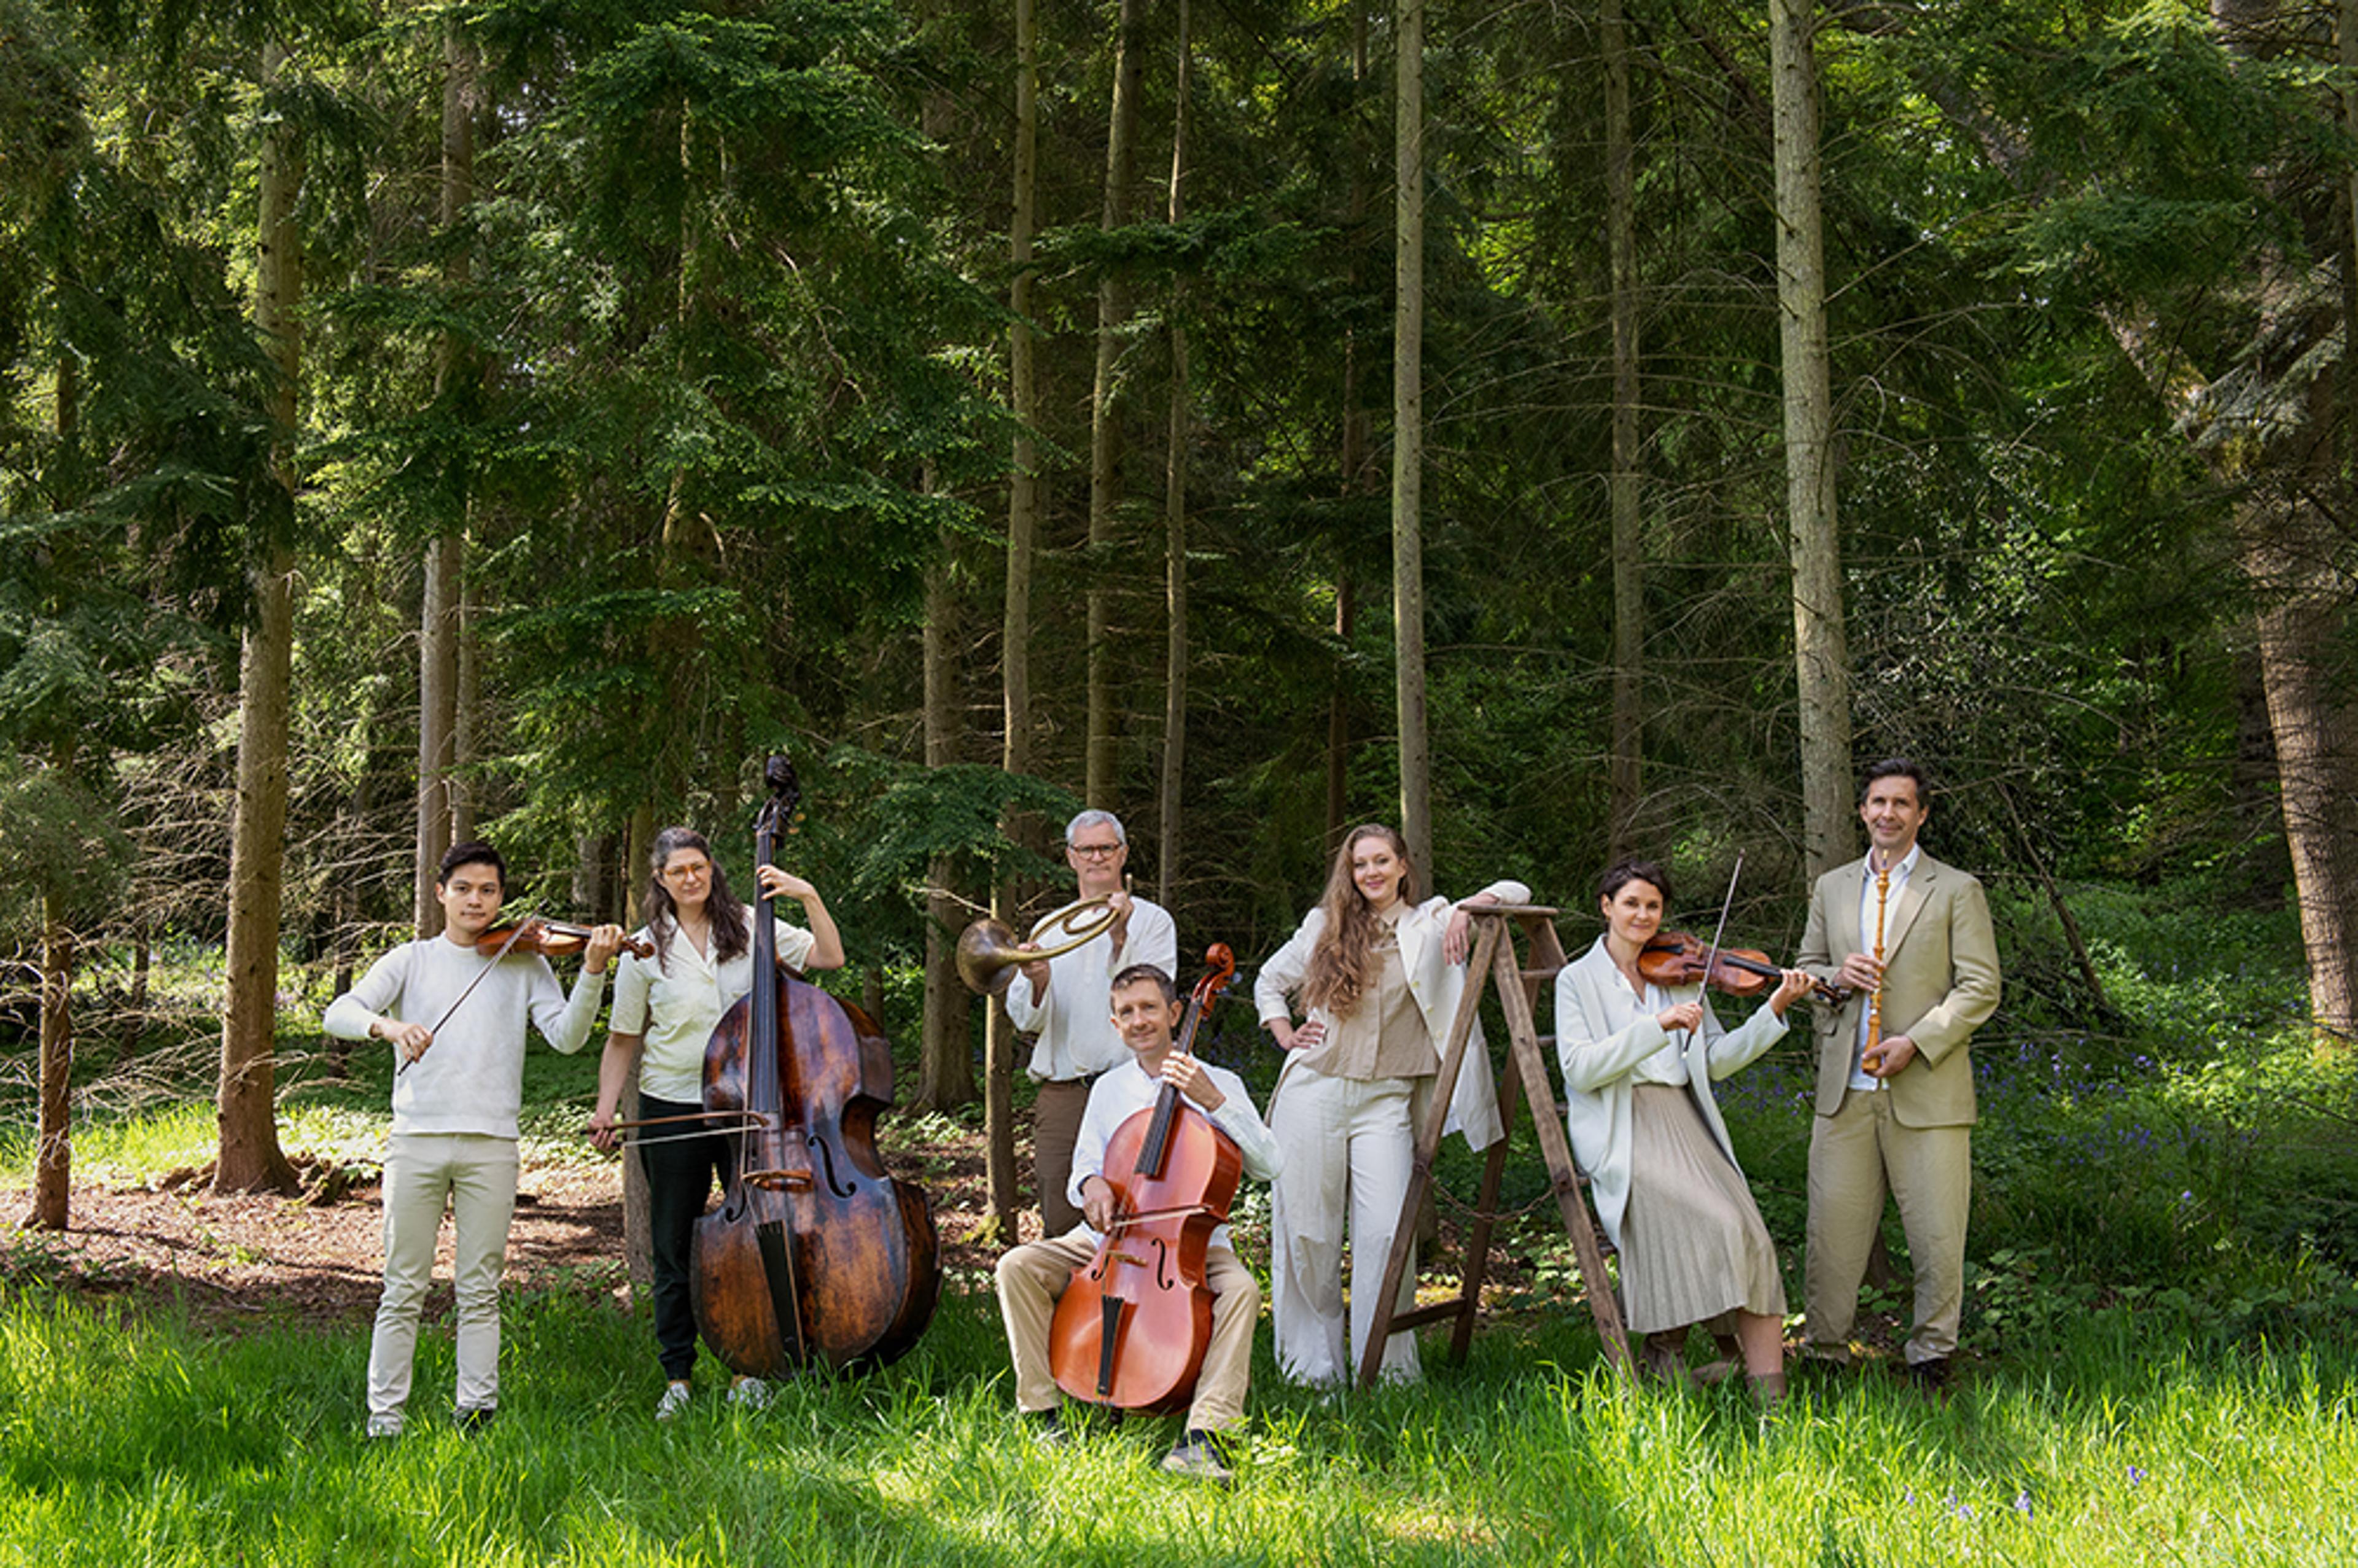 Members of the OAE posing with instruments in nature 